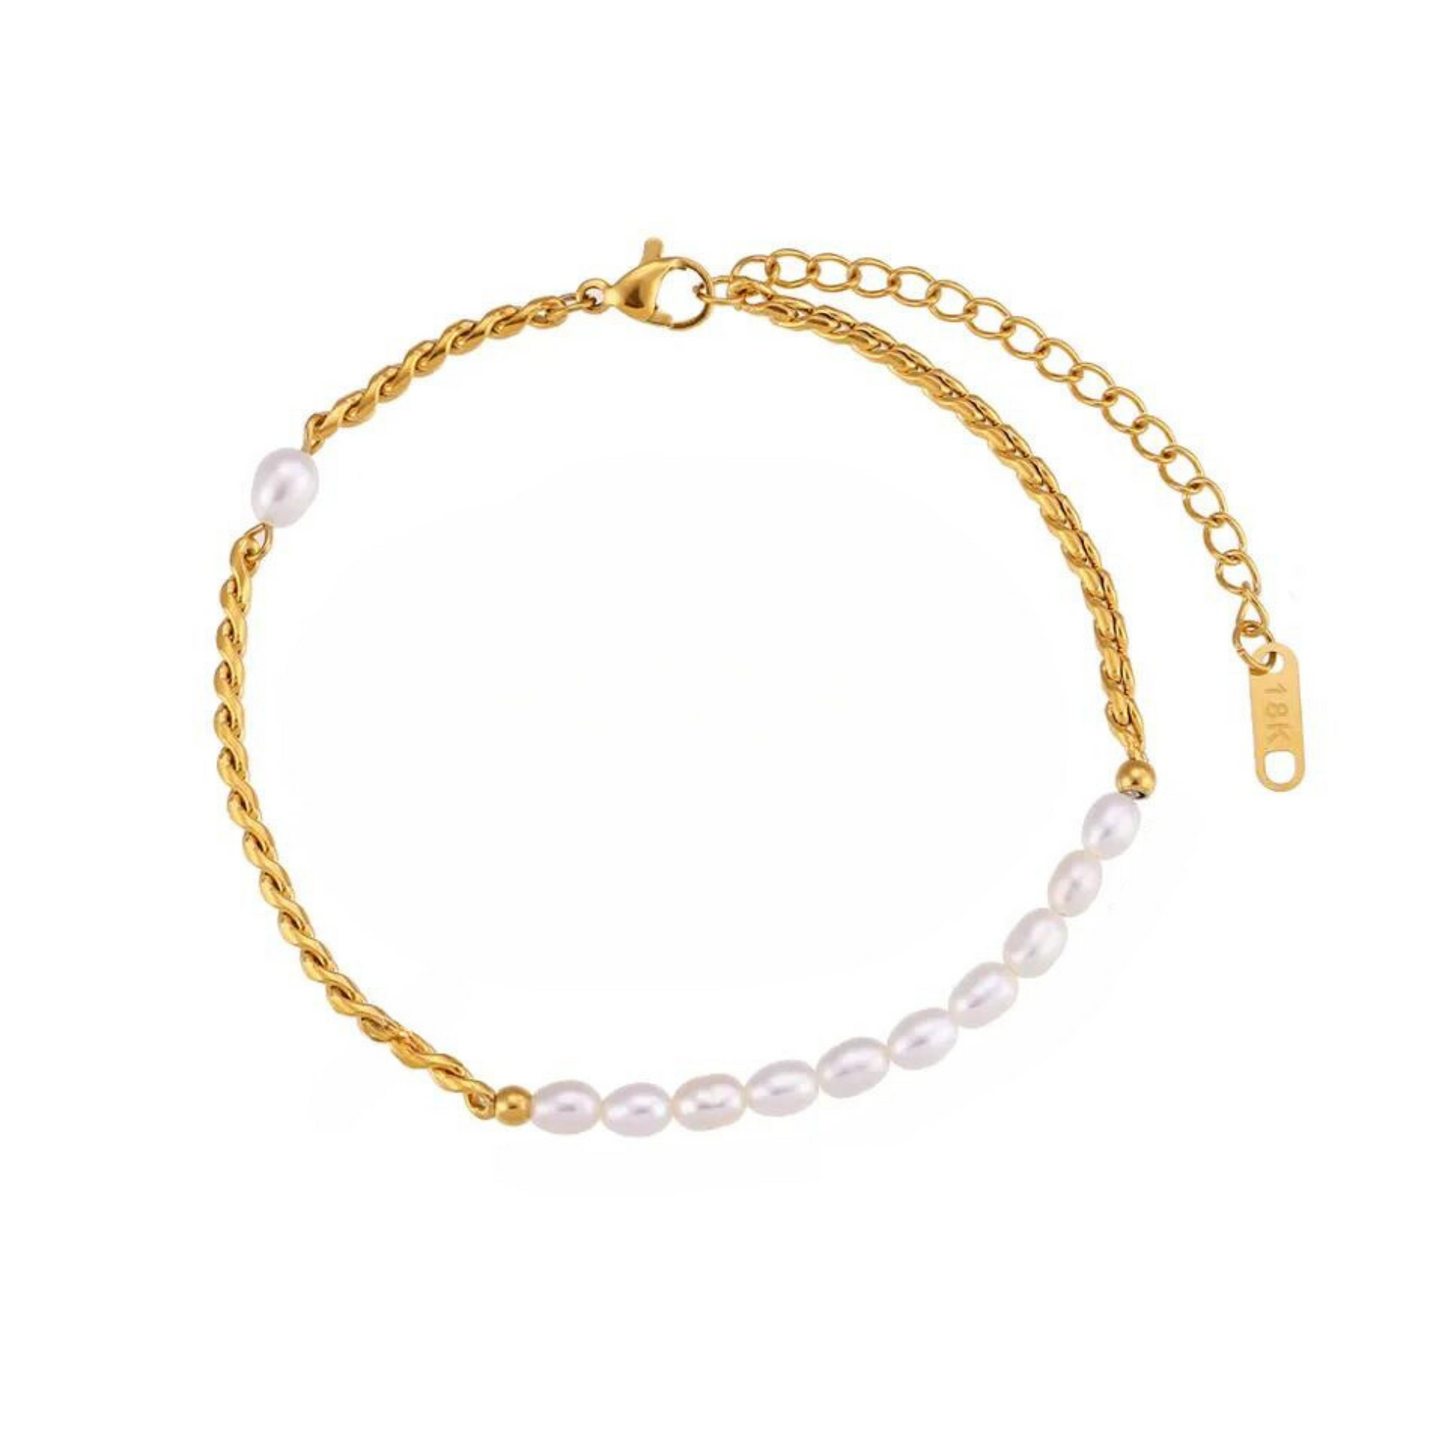 Karissa Stainless Steel With Freshwater Pearls Anklet